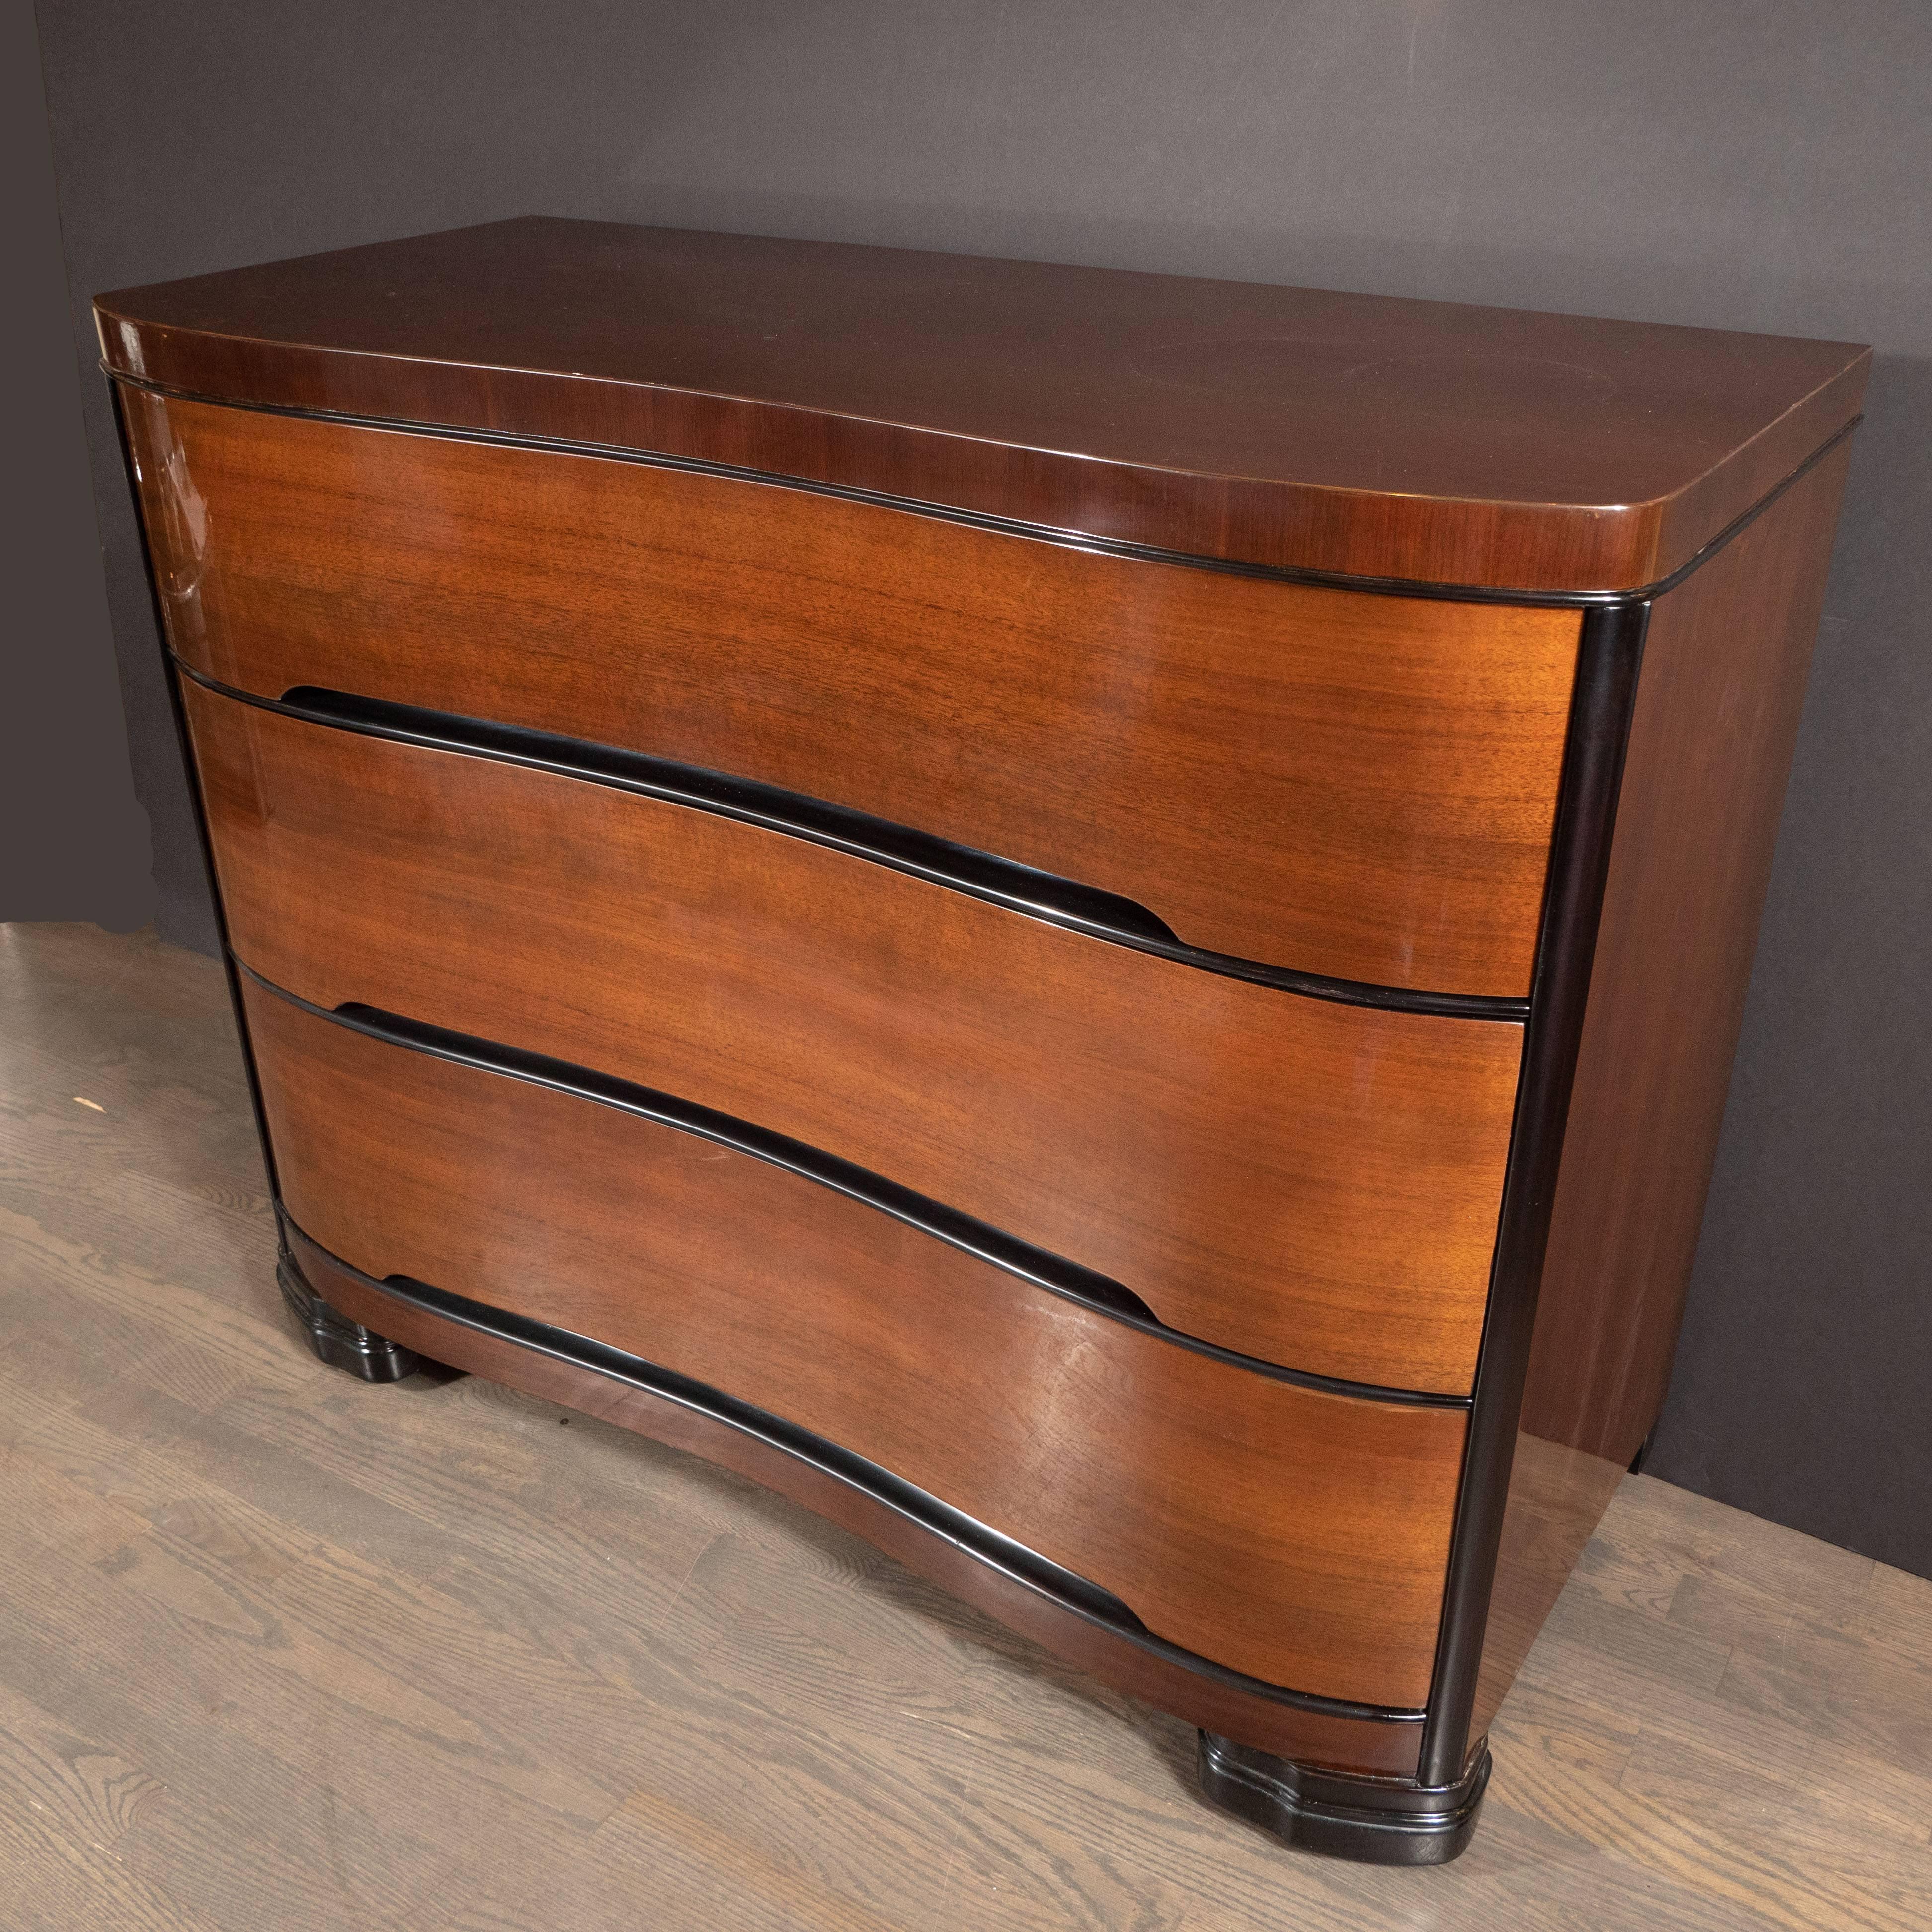 This refined chest was realized by the Tri-Bond Furniture Company in the United States, circa 1935. It features five drawers a bow-front offering sinuous curves in bookmatched mahogany with lacquer detailing tracing the top and bottom of each and